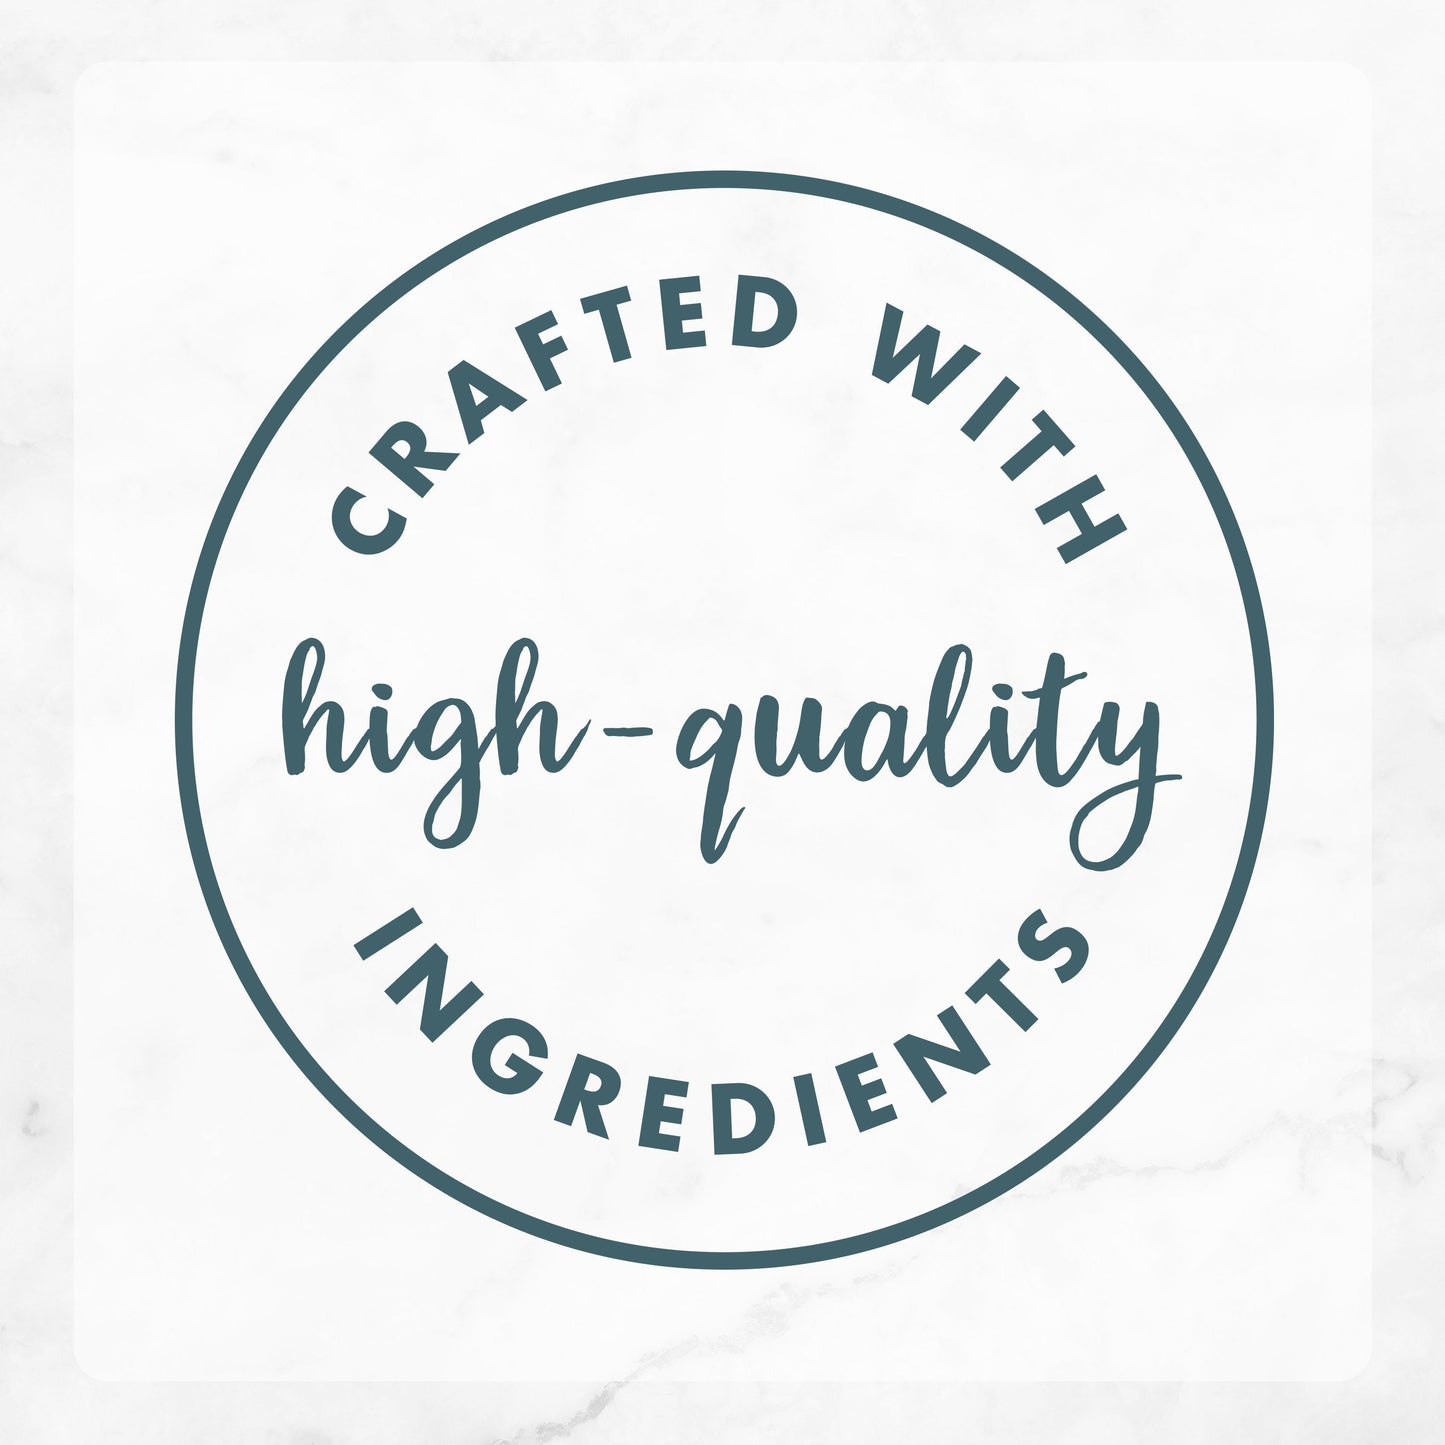 Crafted with high-quality ingredients